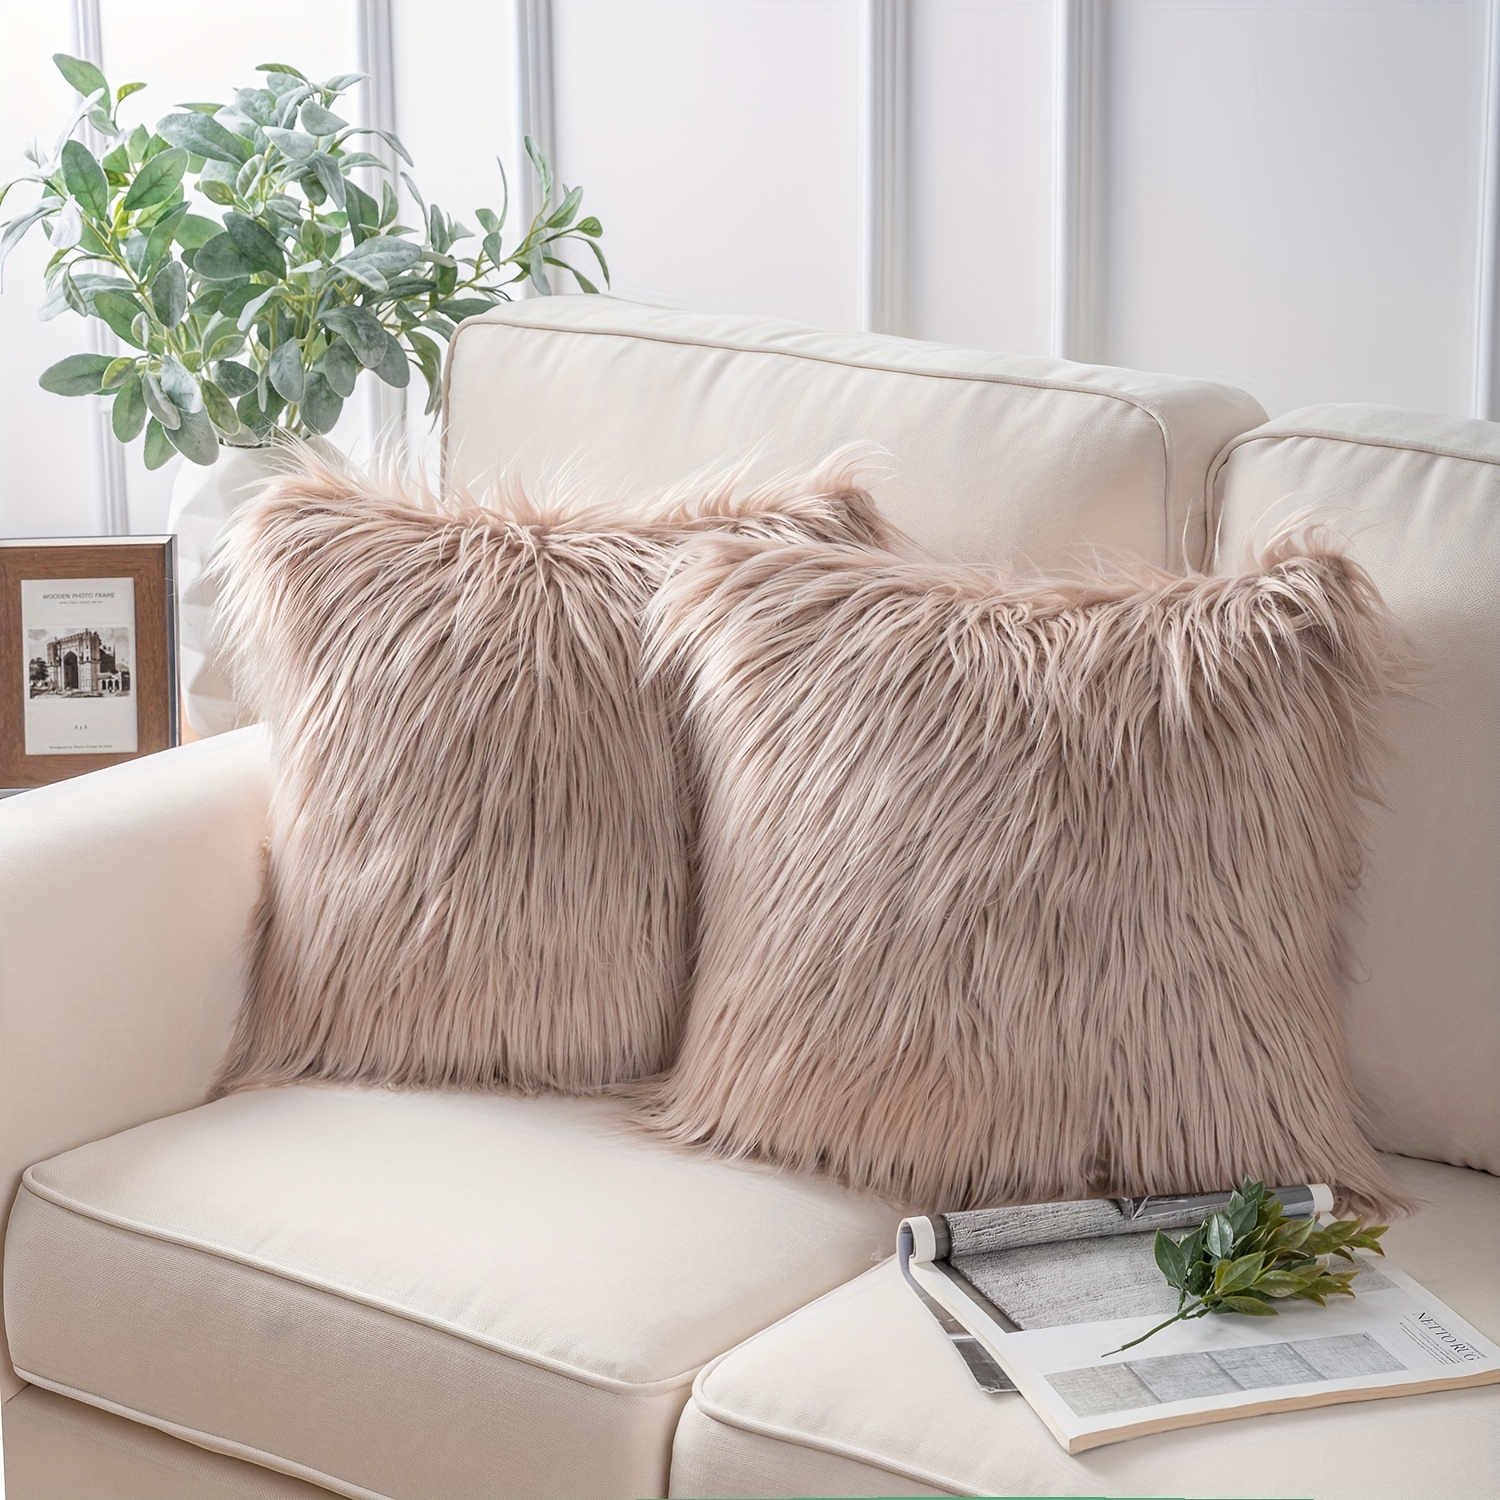 

Luxury Mongolian Fluffy Faux Fur Series Square Decorative Throw Pillow Covers For Couch, 22x22in 55*55cm 2 Pack